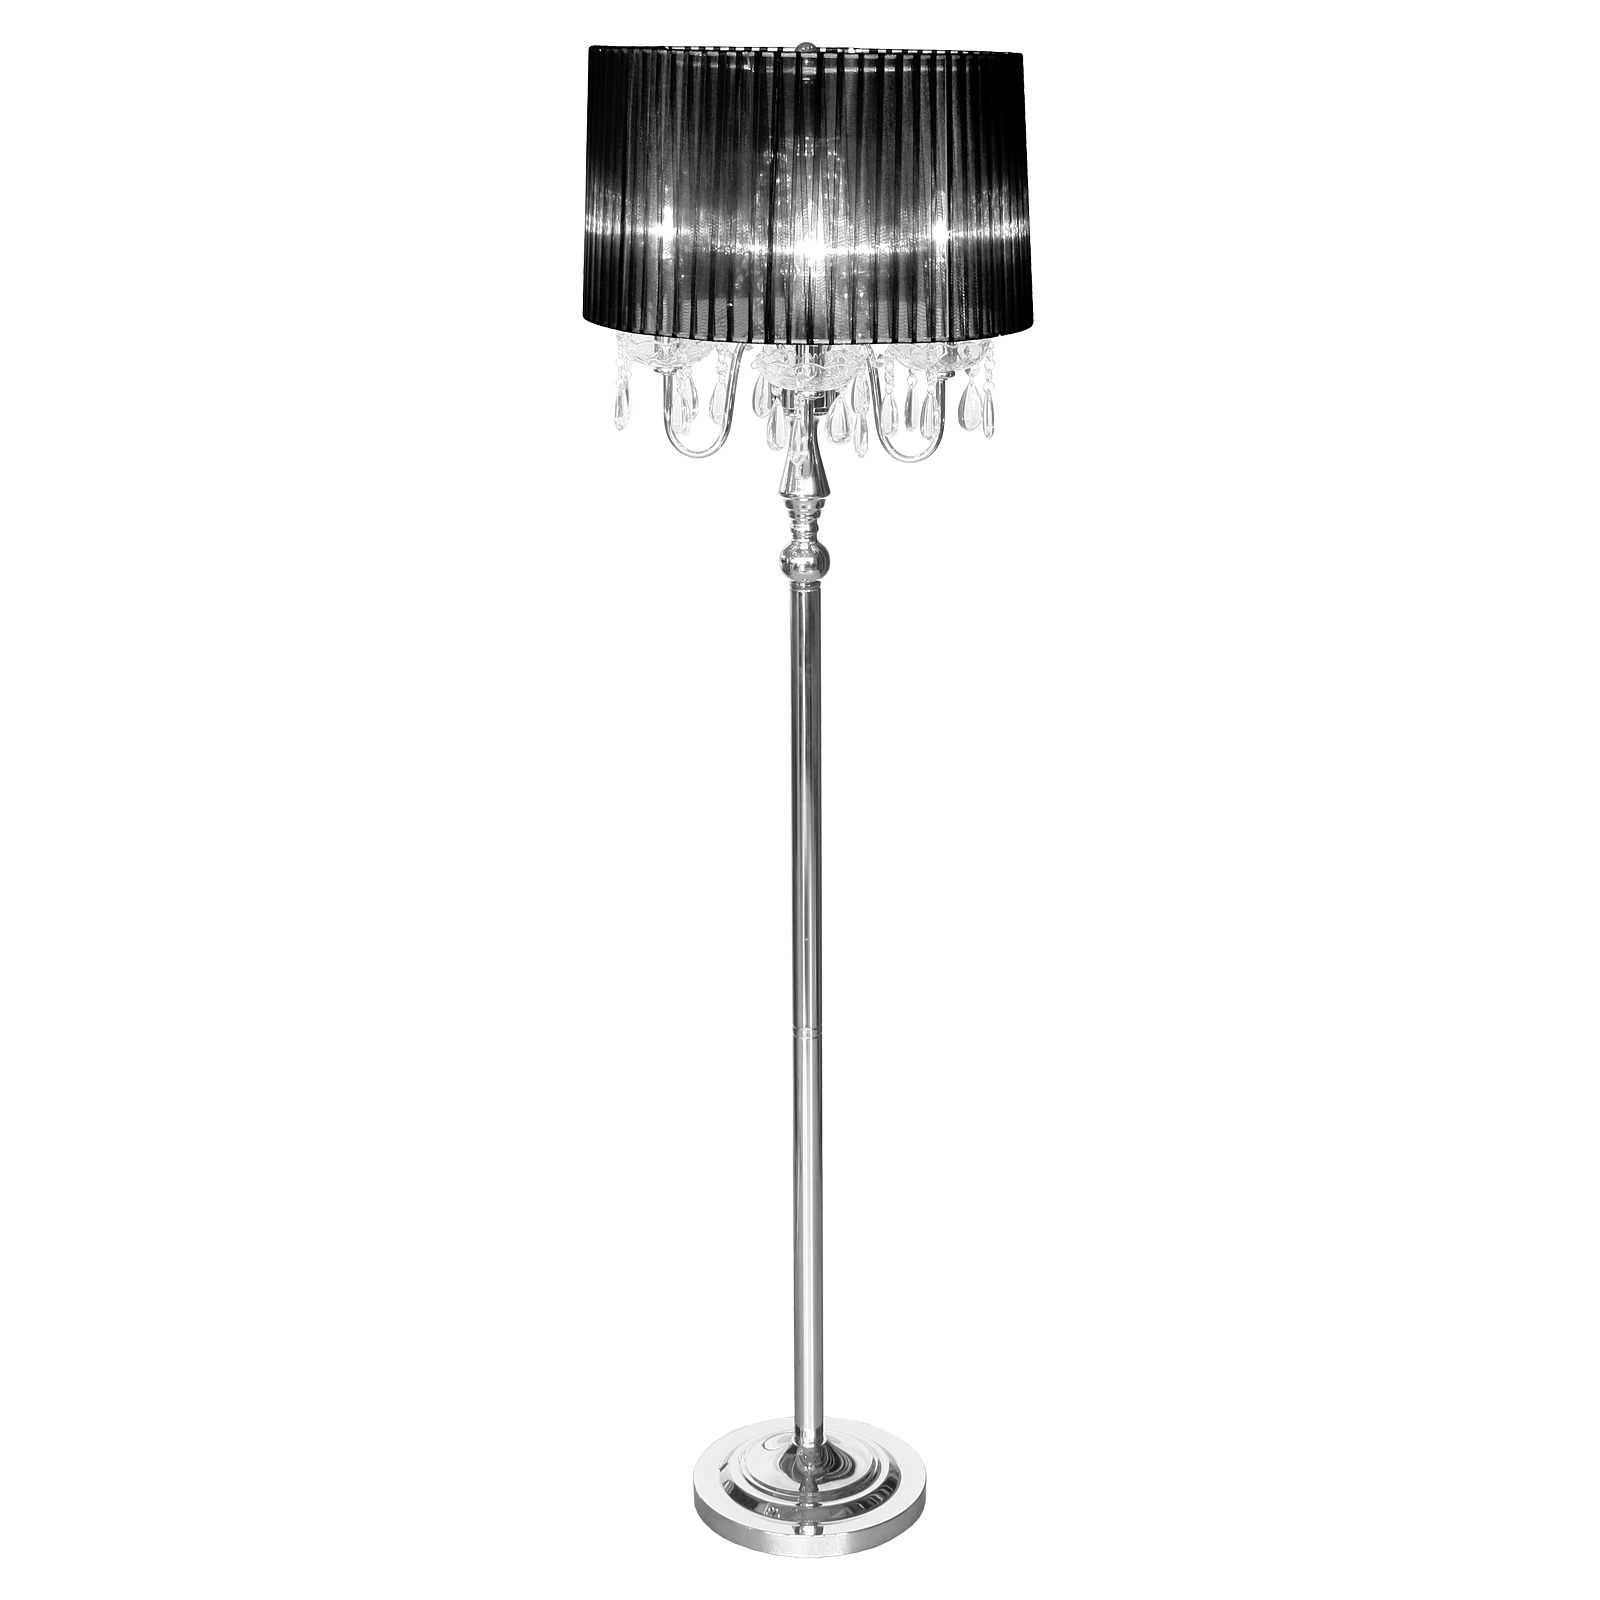 Details About Pretty Black Beaumont Four Light Floor Lamp Chandelier Crystals Standard Light with regard to size 1600 X 1600